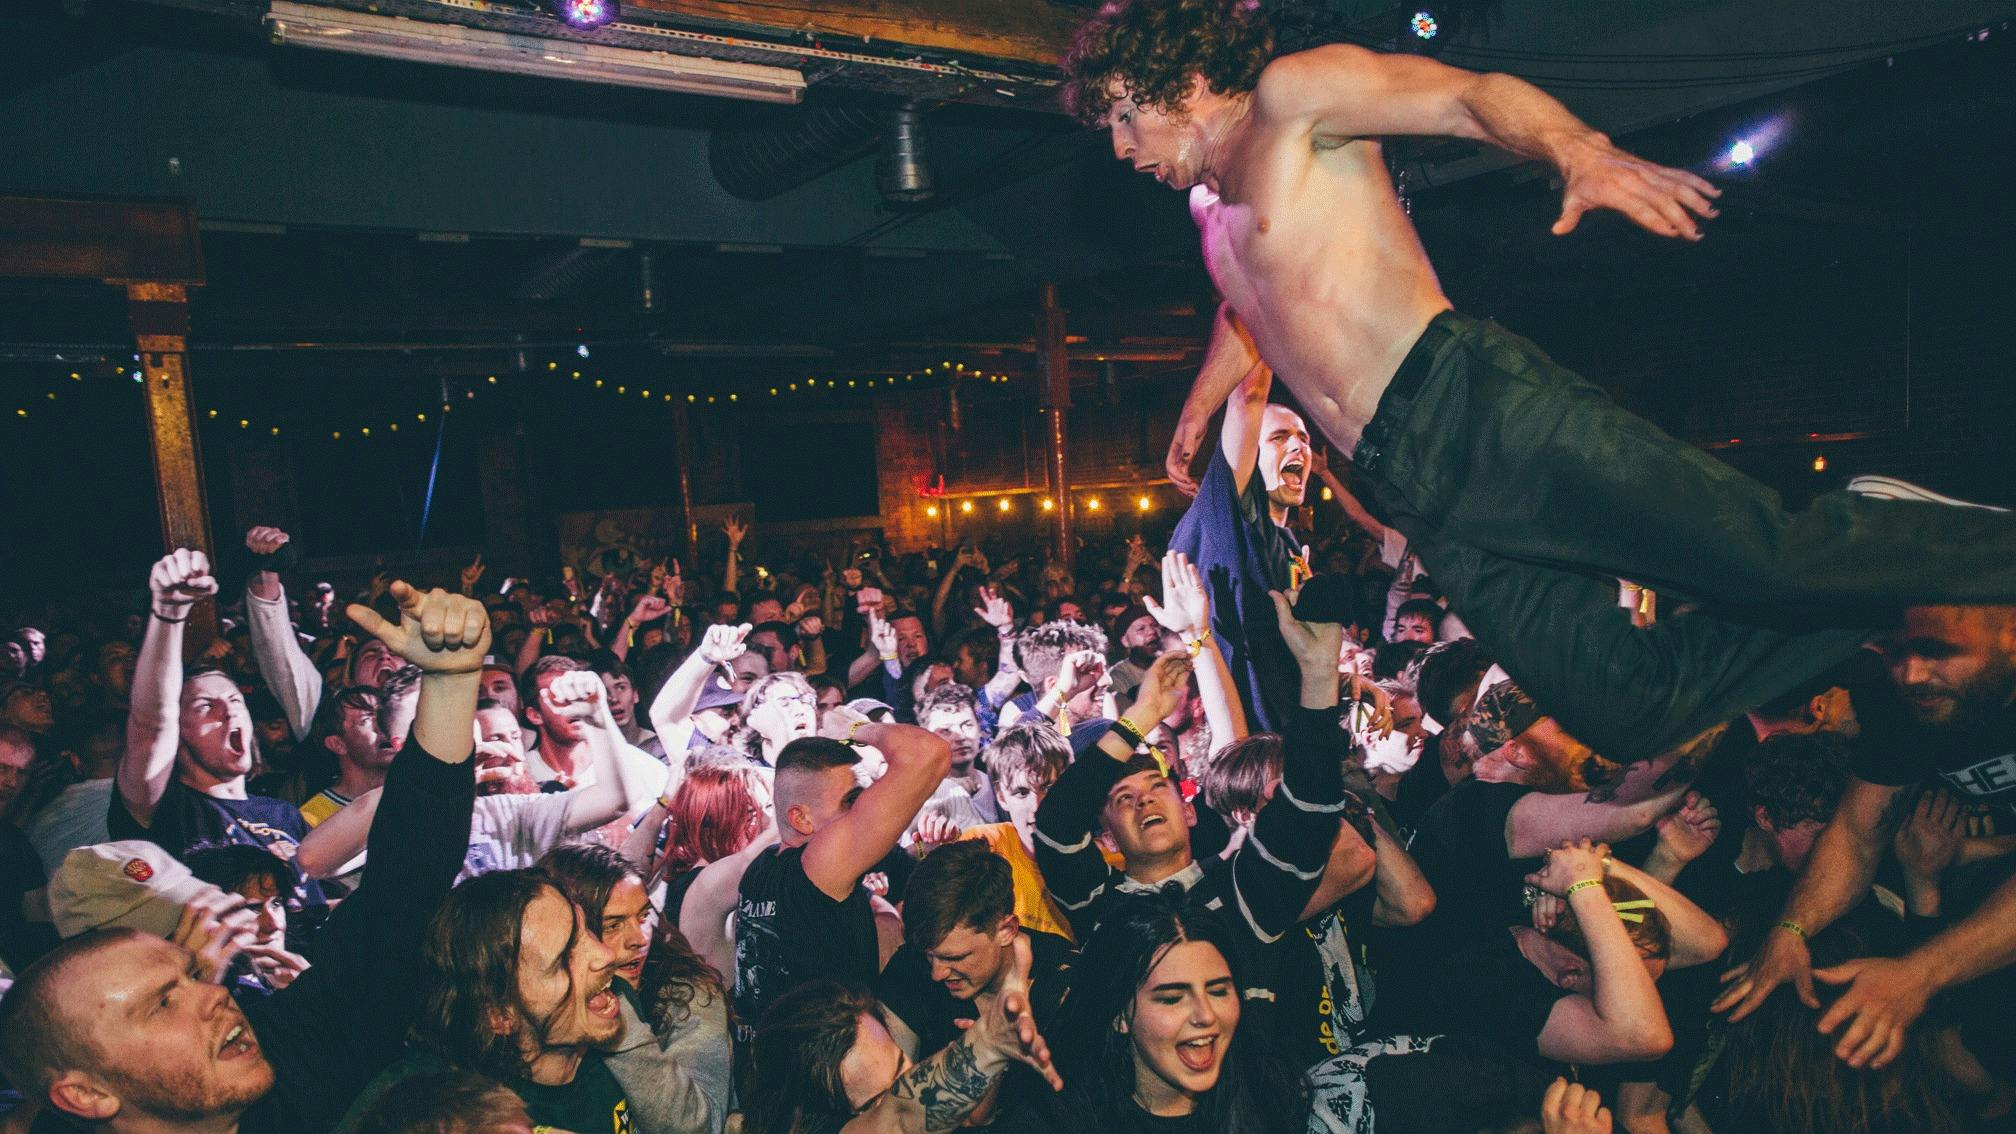 Turnstile: “There’s no higher priority than having this feel special and unique”